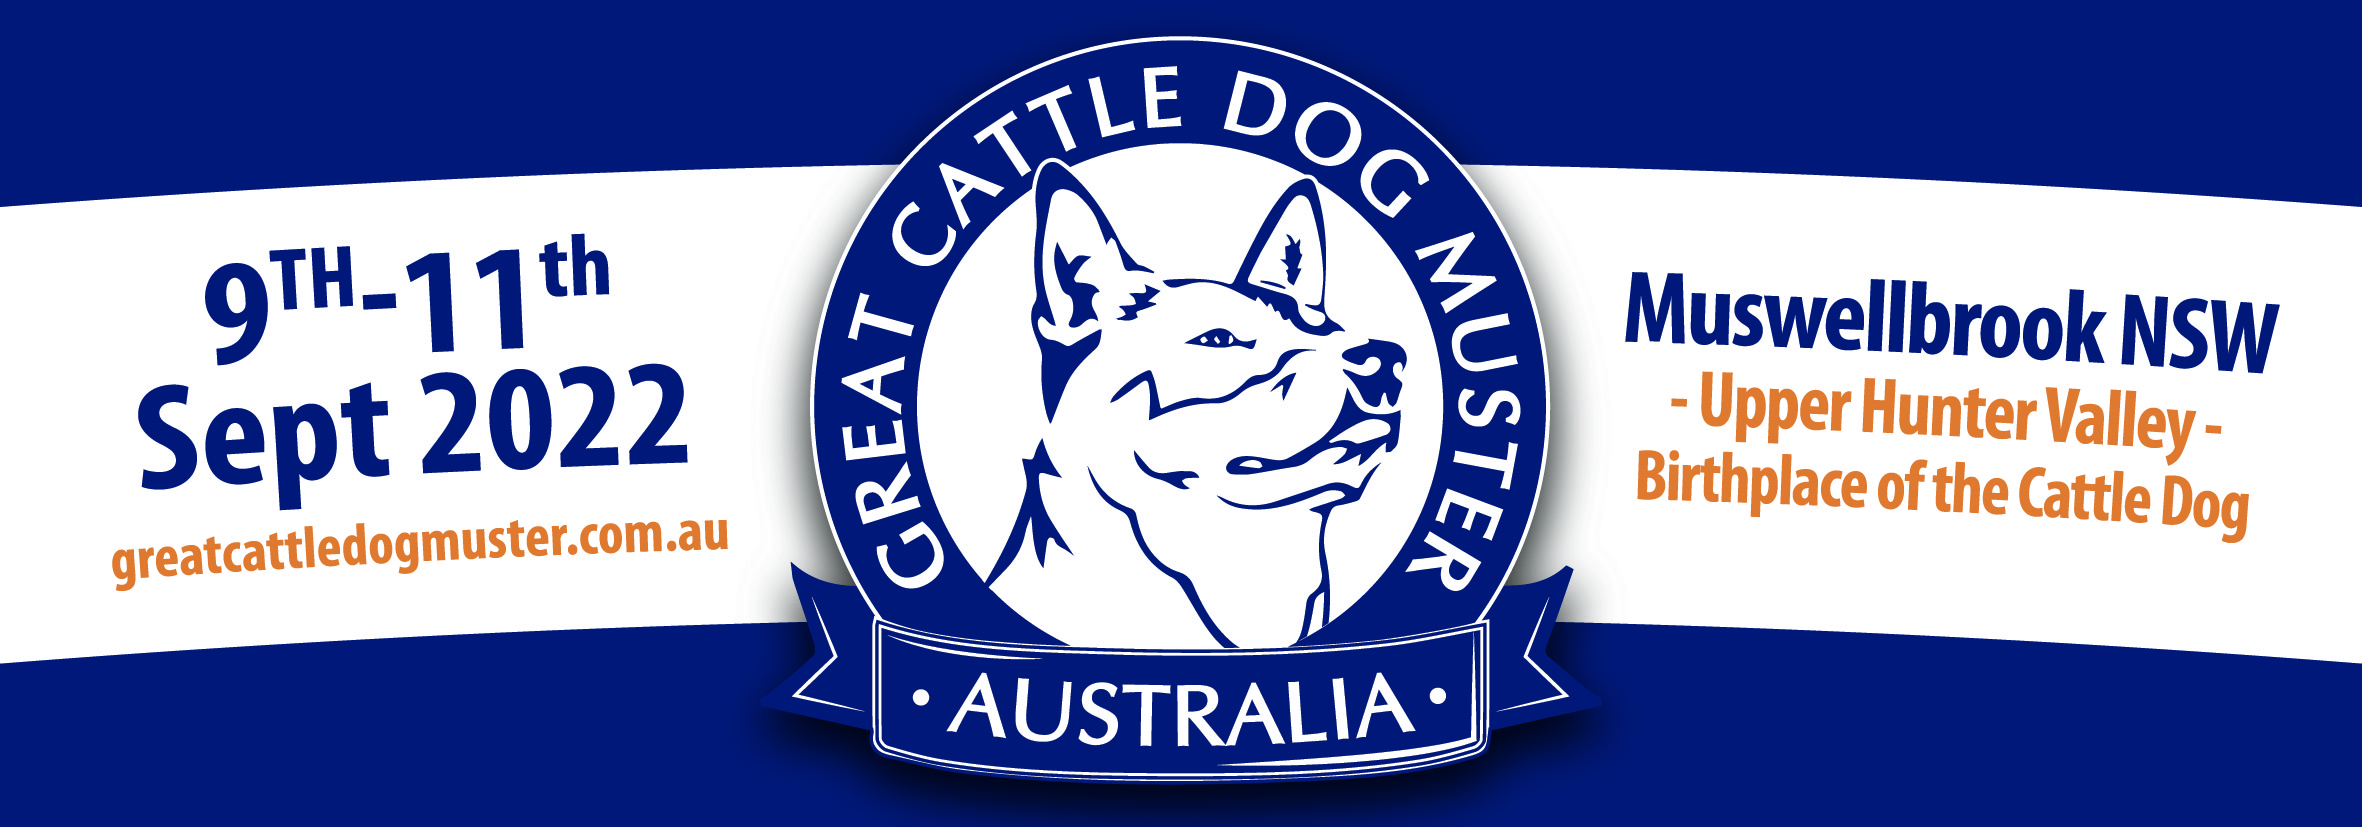 2022 Merchandise • The Great Cattle Dog Muster